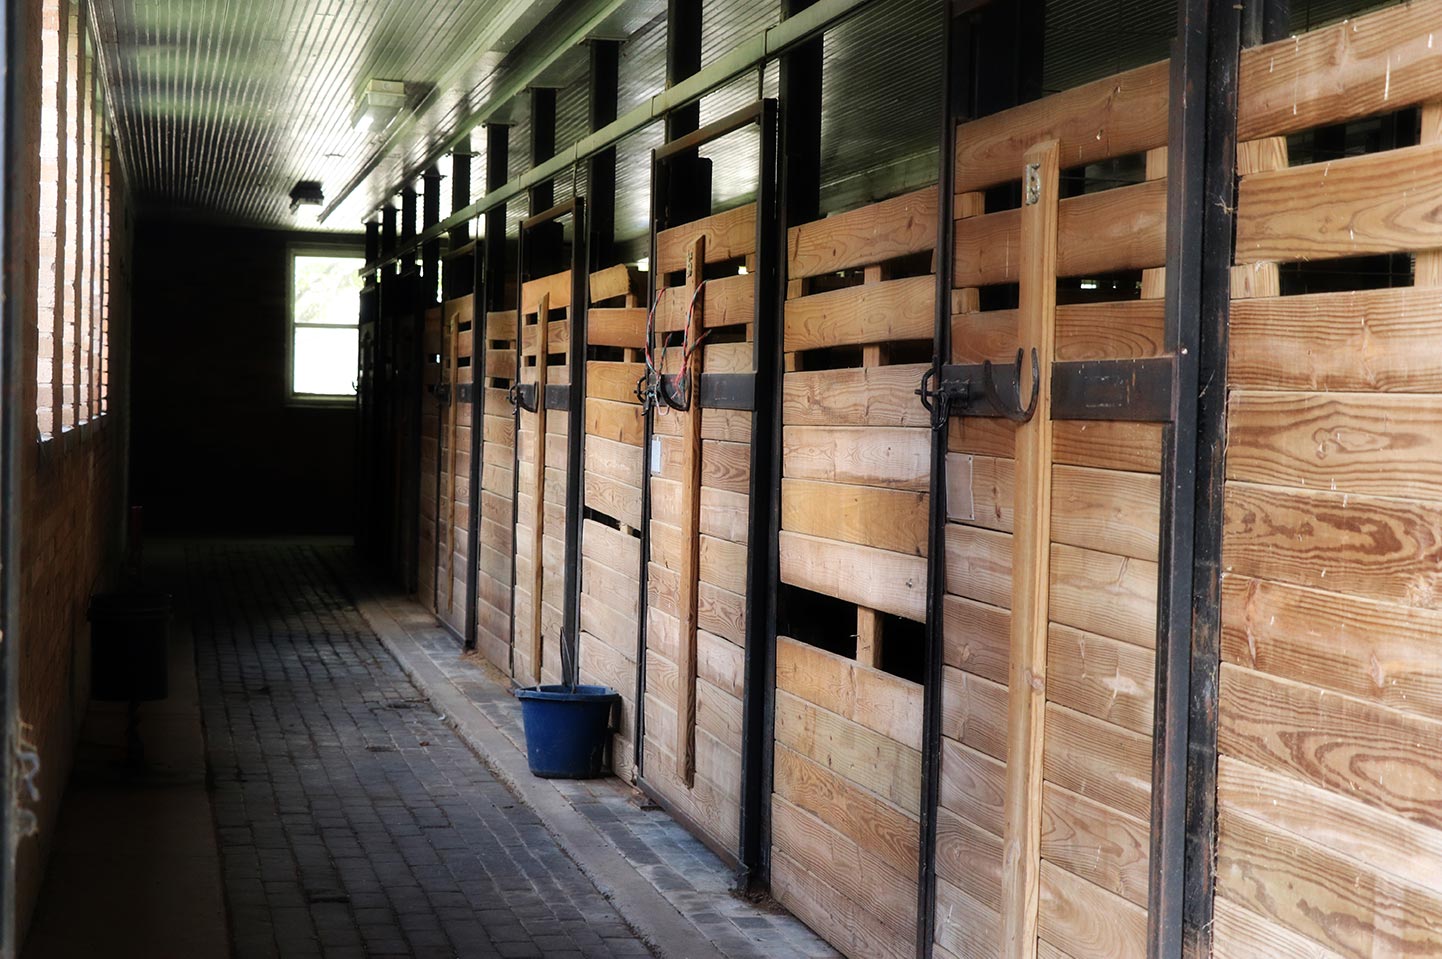 Interior view of the stable stalls